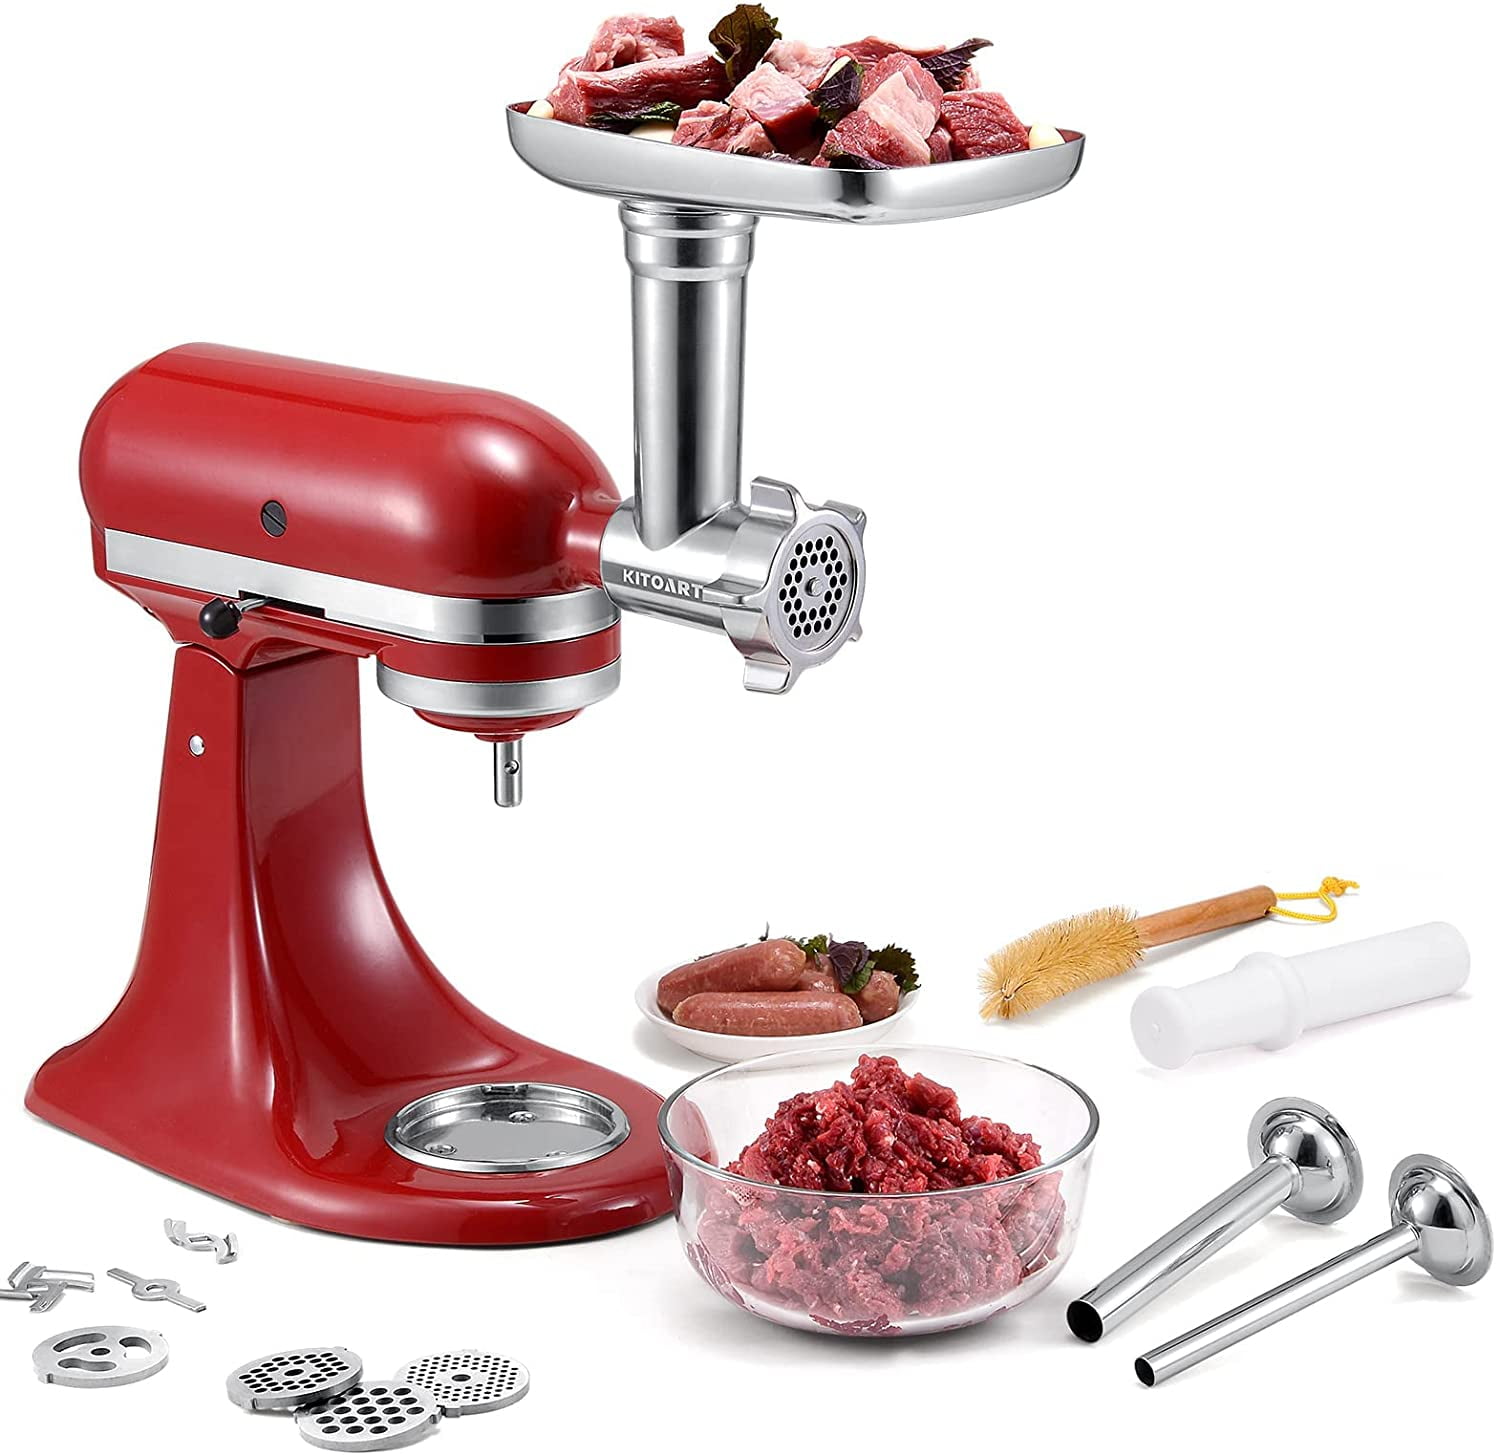 Kitchood Meat grinder Attachment for KitchenAid Stand Mixers, Accessories  Included 2 Sausage Stuffer Tubes, Durable Metal Food grinder At